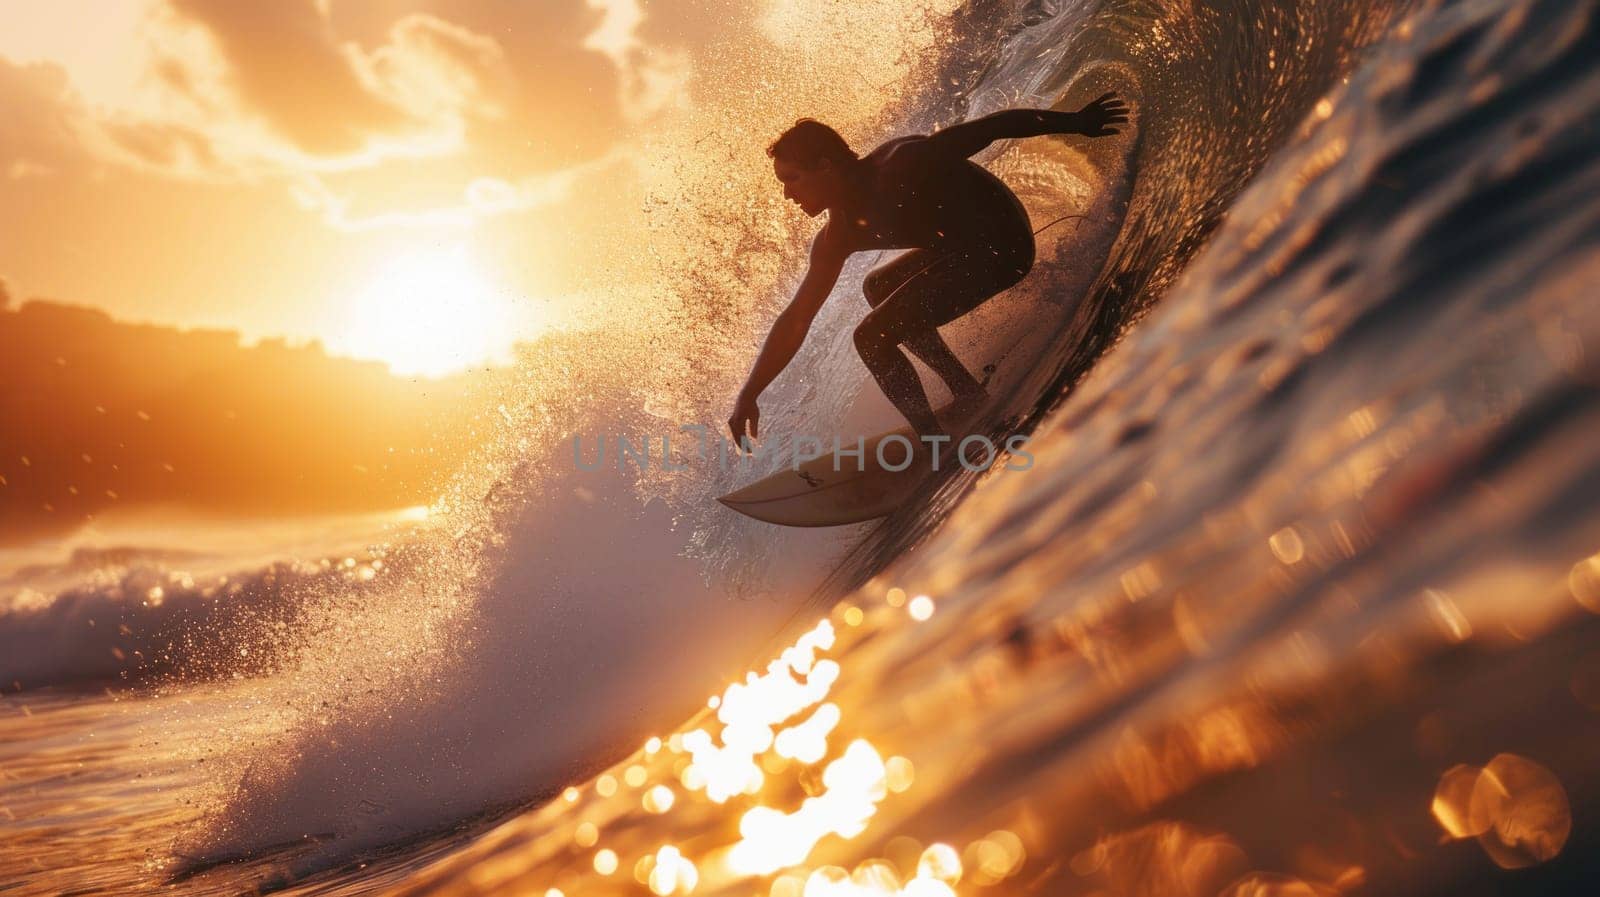 A surfer is riding a wave in the ocean by golfmerrymaker